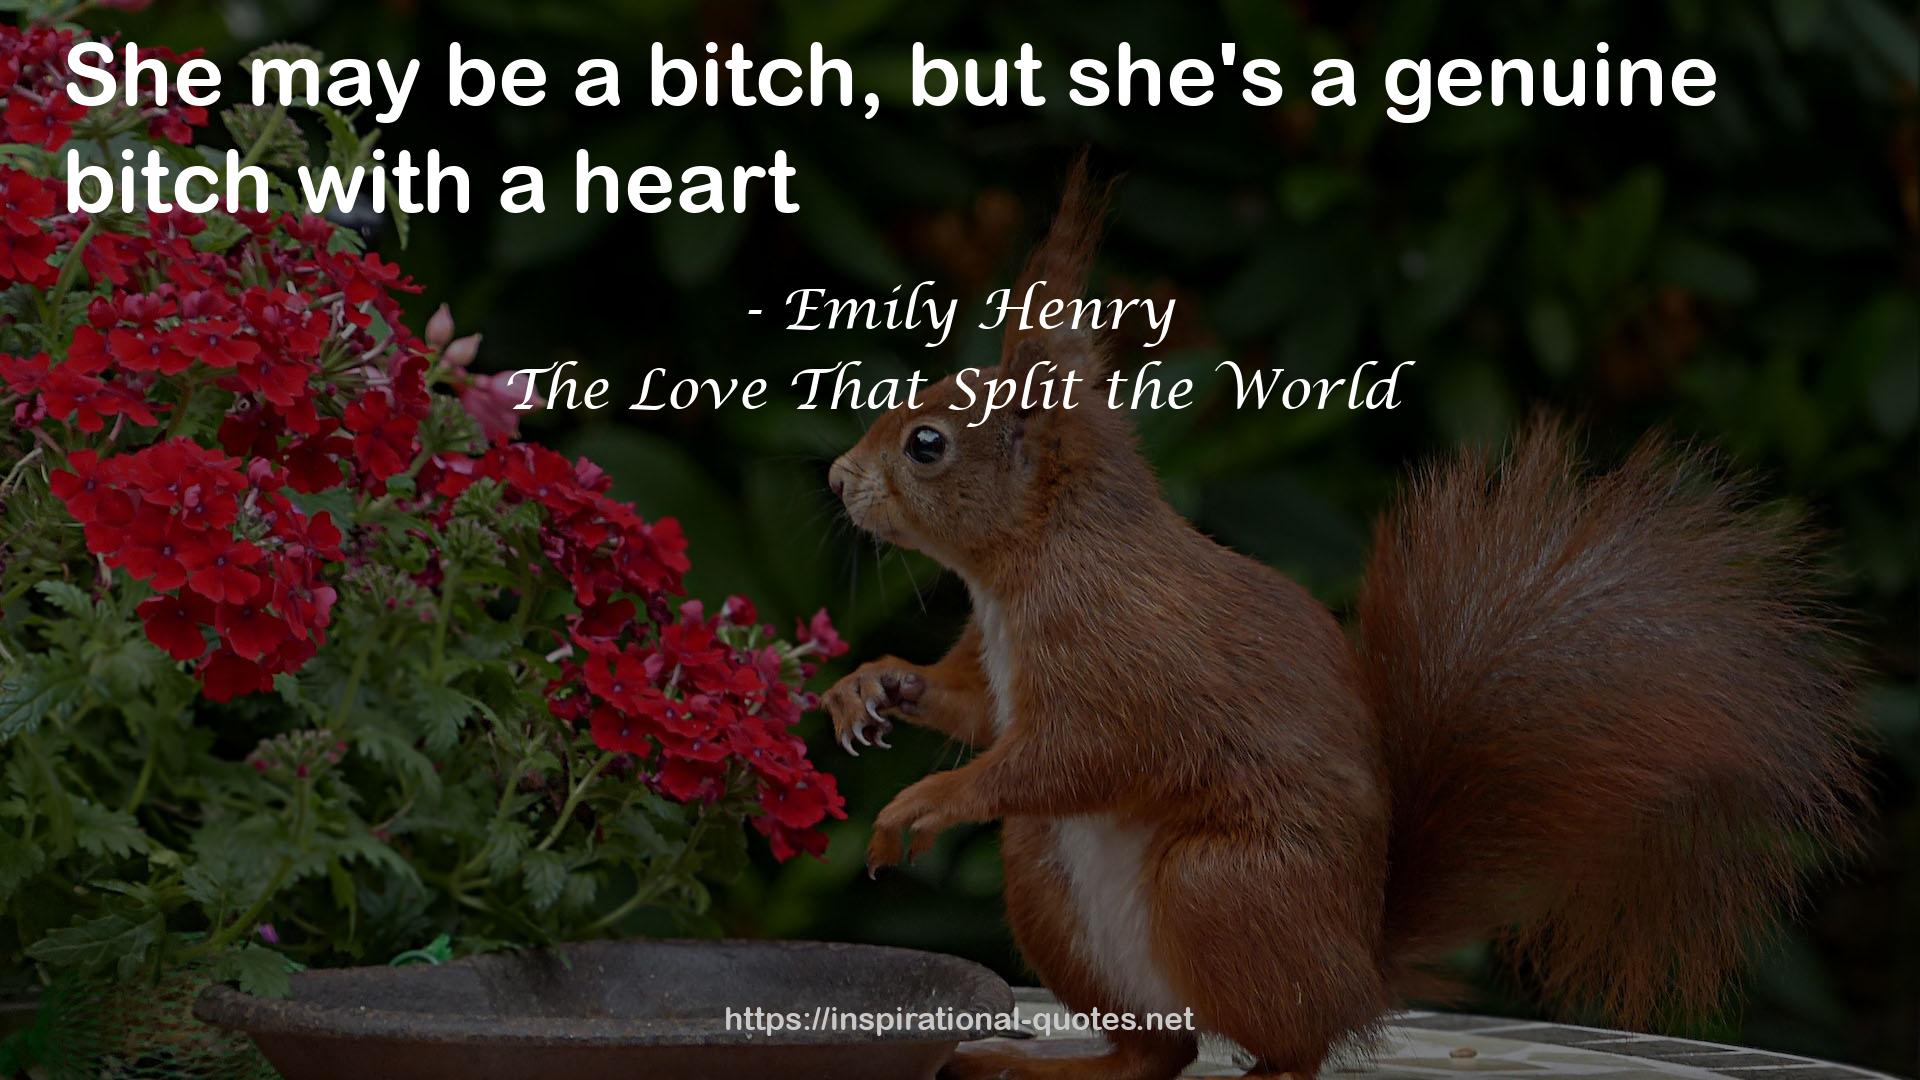 The Love That Split the World QUOTES